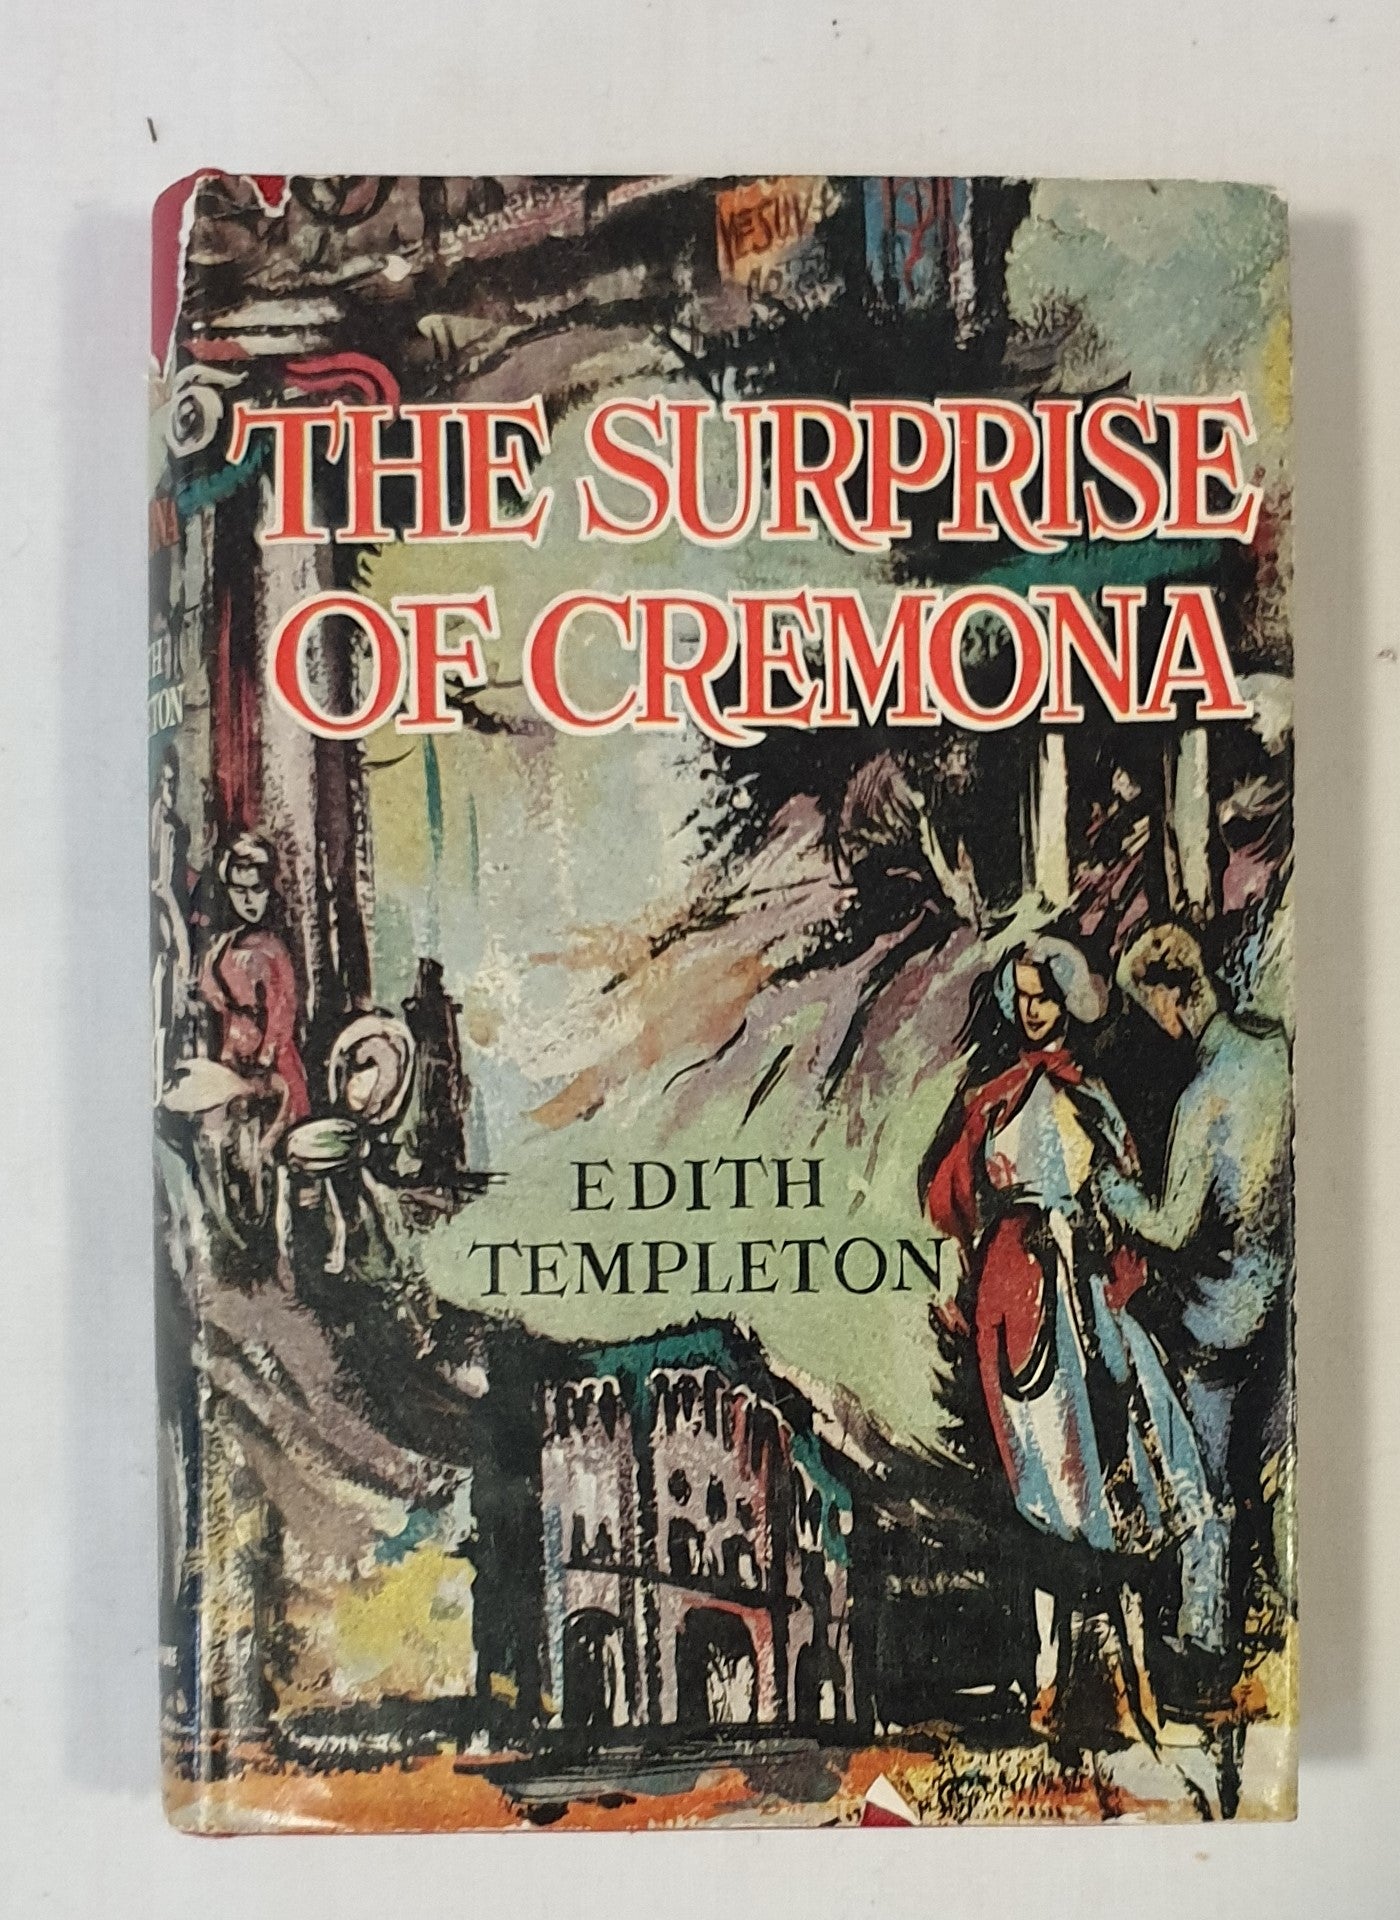 The Surprise of Cremona by Edith Templeton